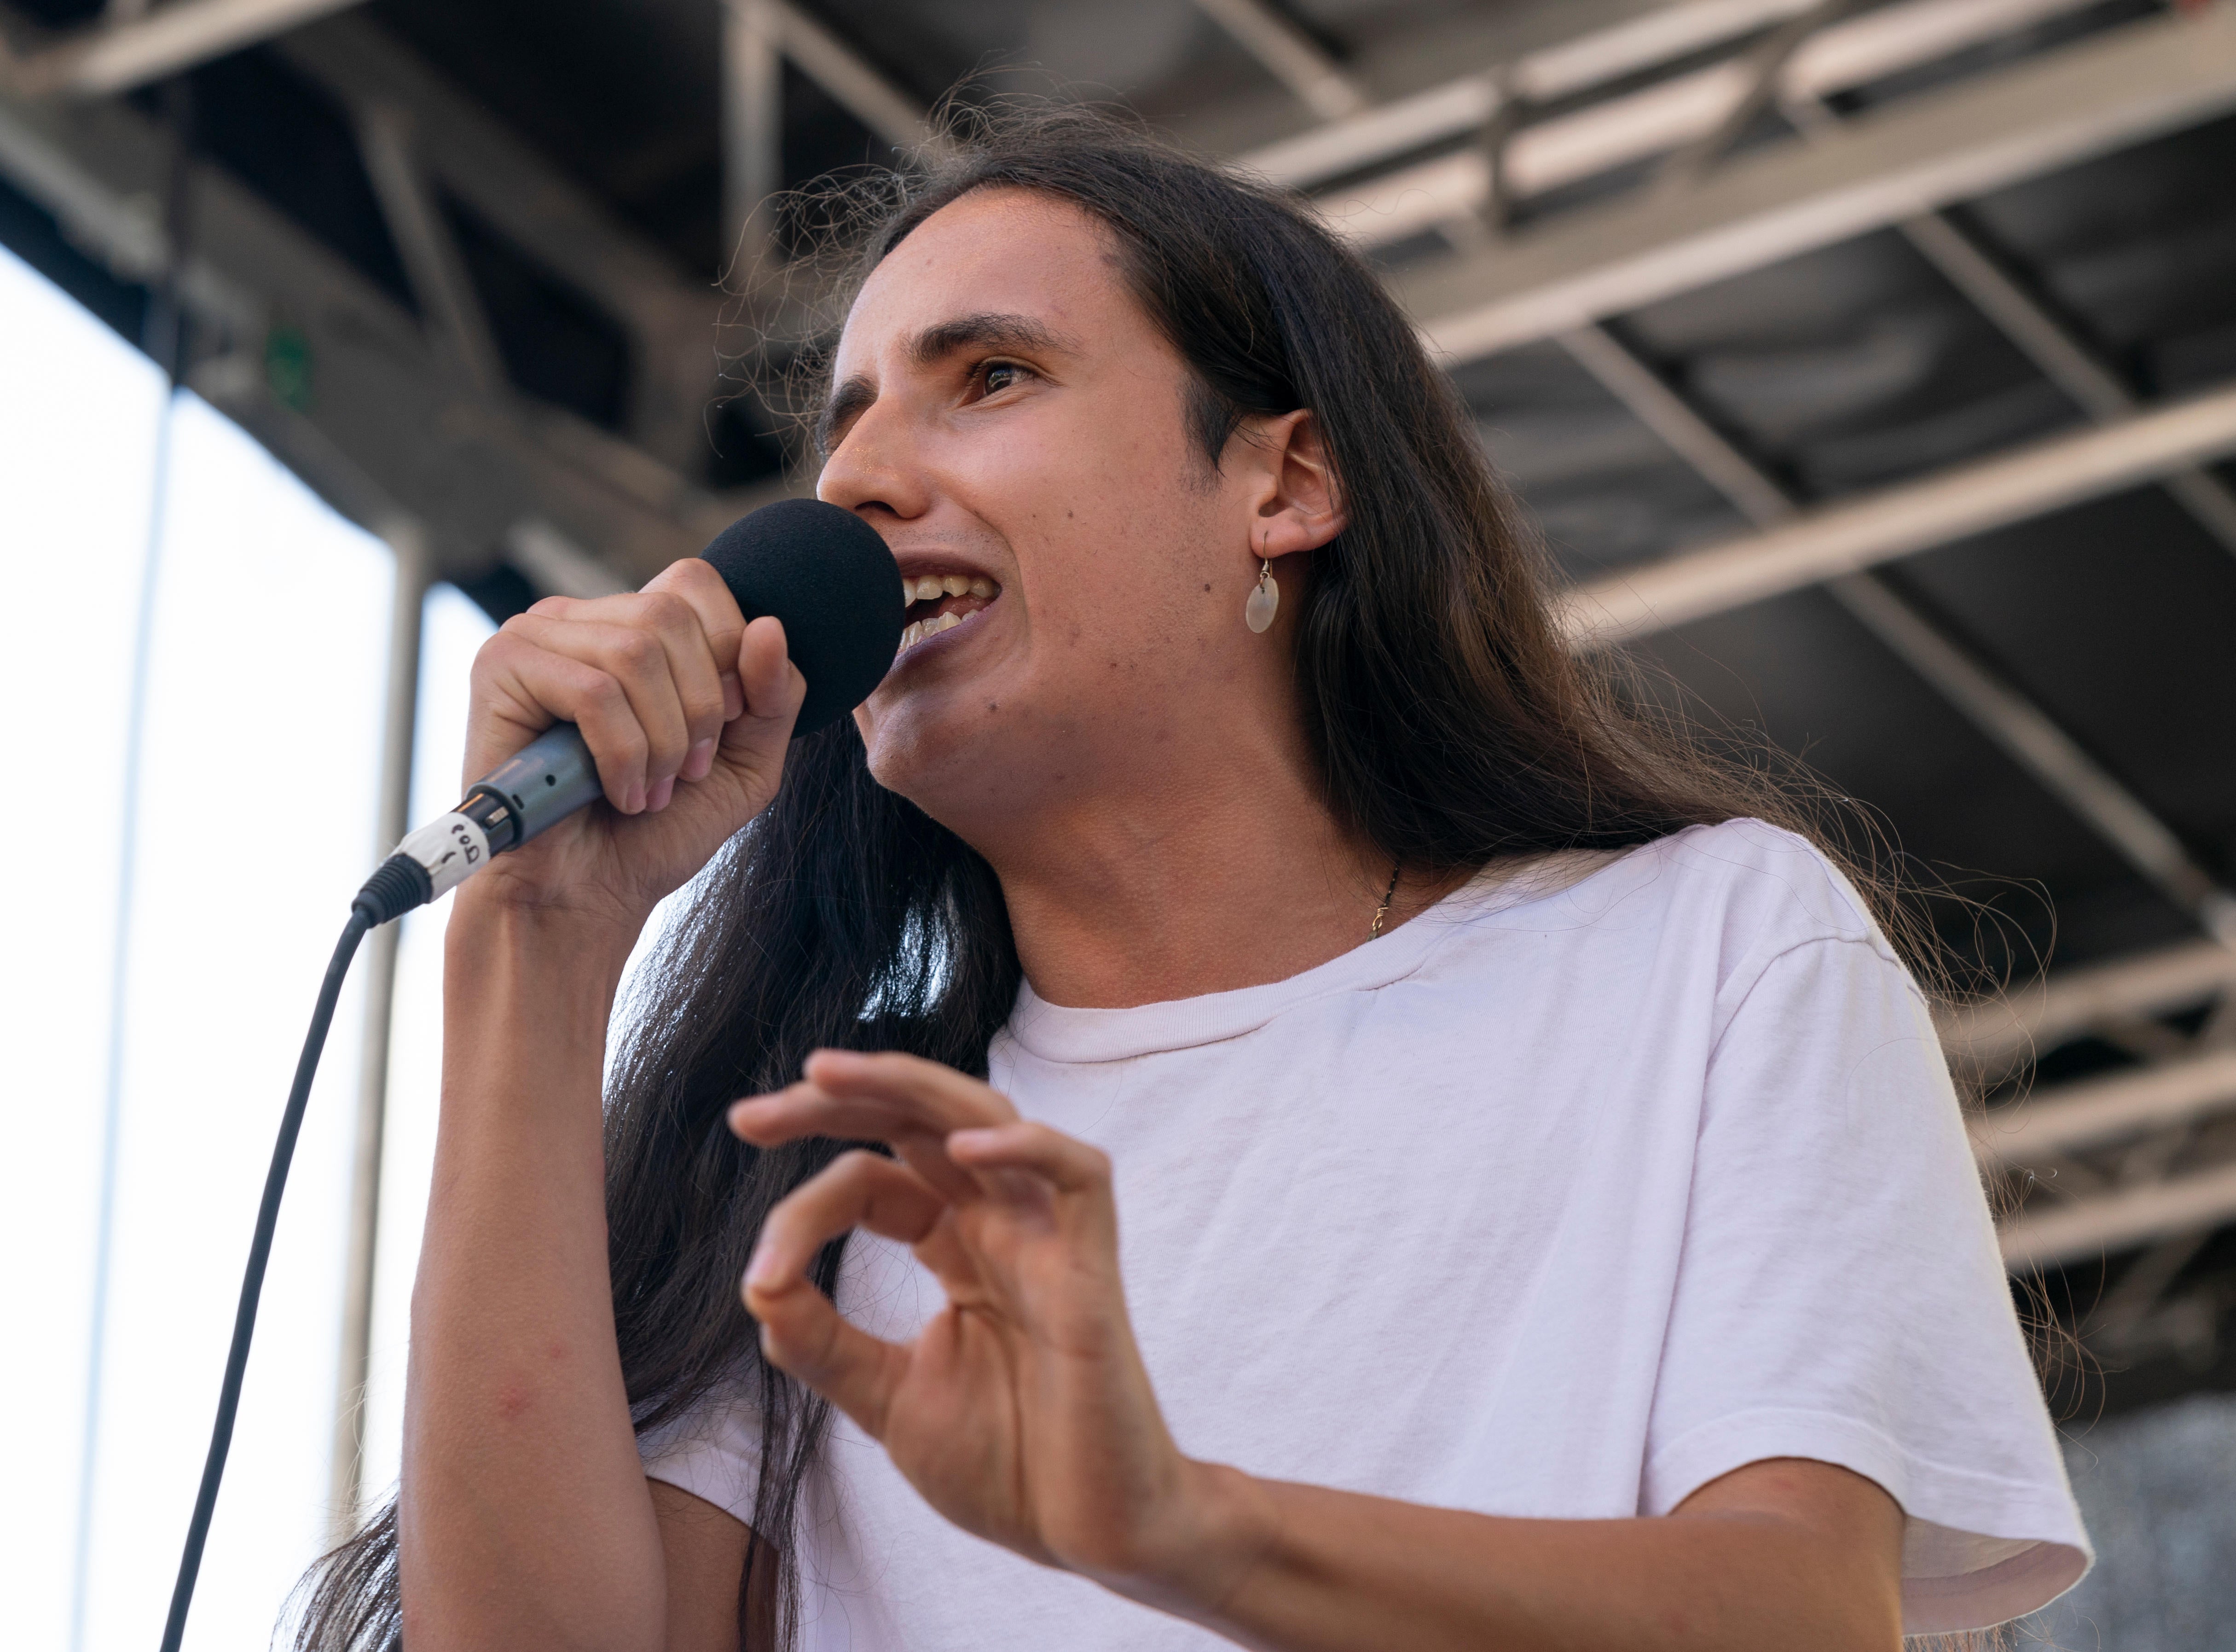 New York, NY – September 20, 2019: Indigenous activist 19 year-old Xiuhtezcatl Martinez speaks on stage during NYC Climate Strike rally and demonstration at Battery Park